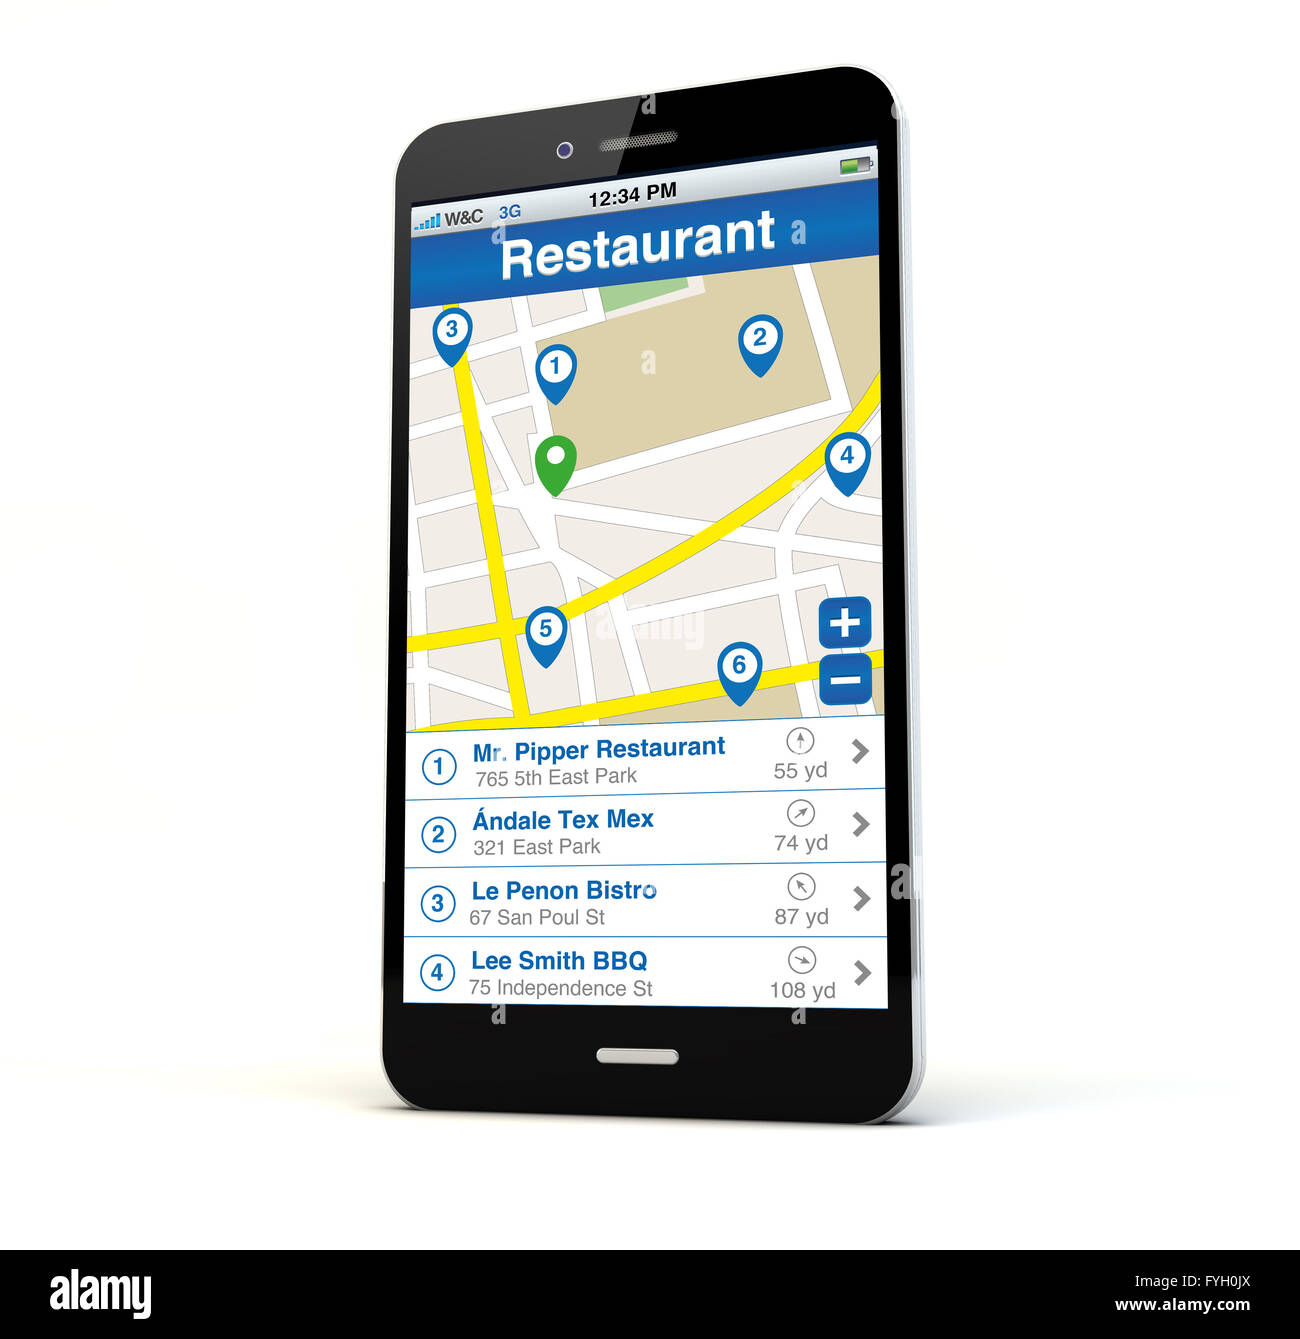 render of a phone with restaurant search app on the screen isolated. Screen graphics are made up. Stock Photo